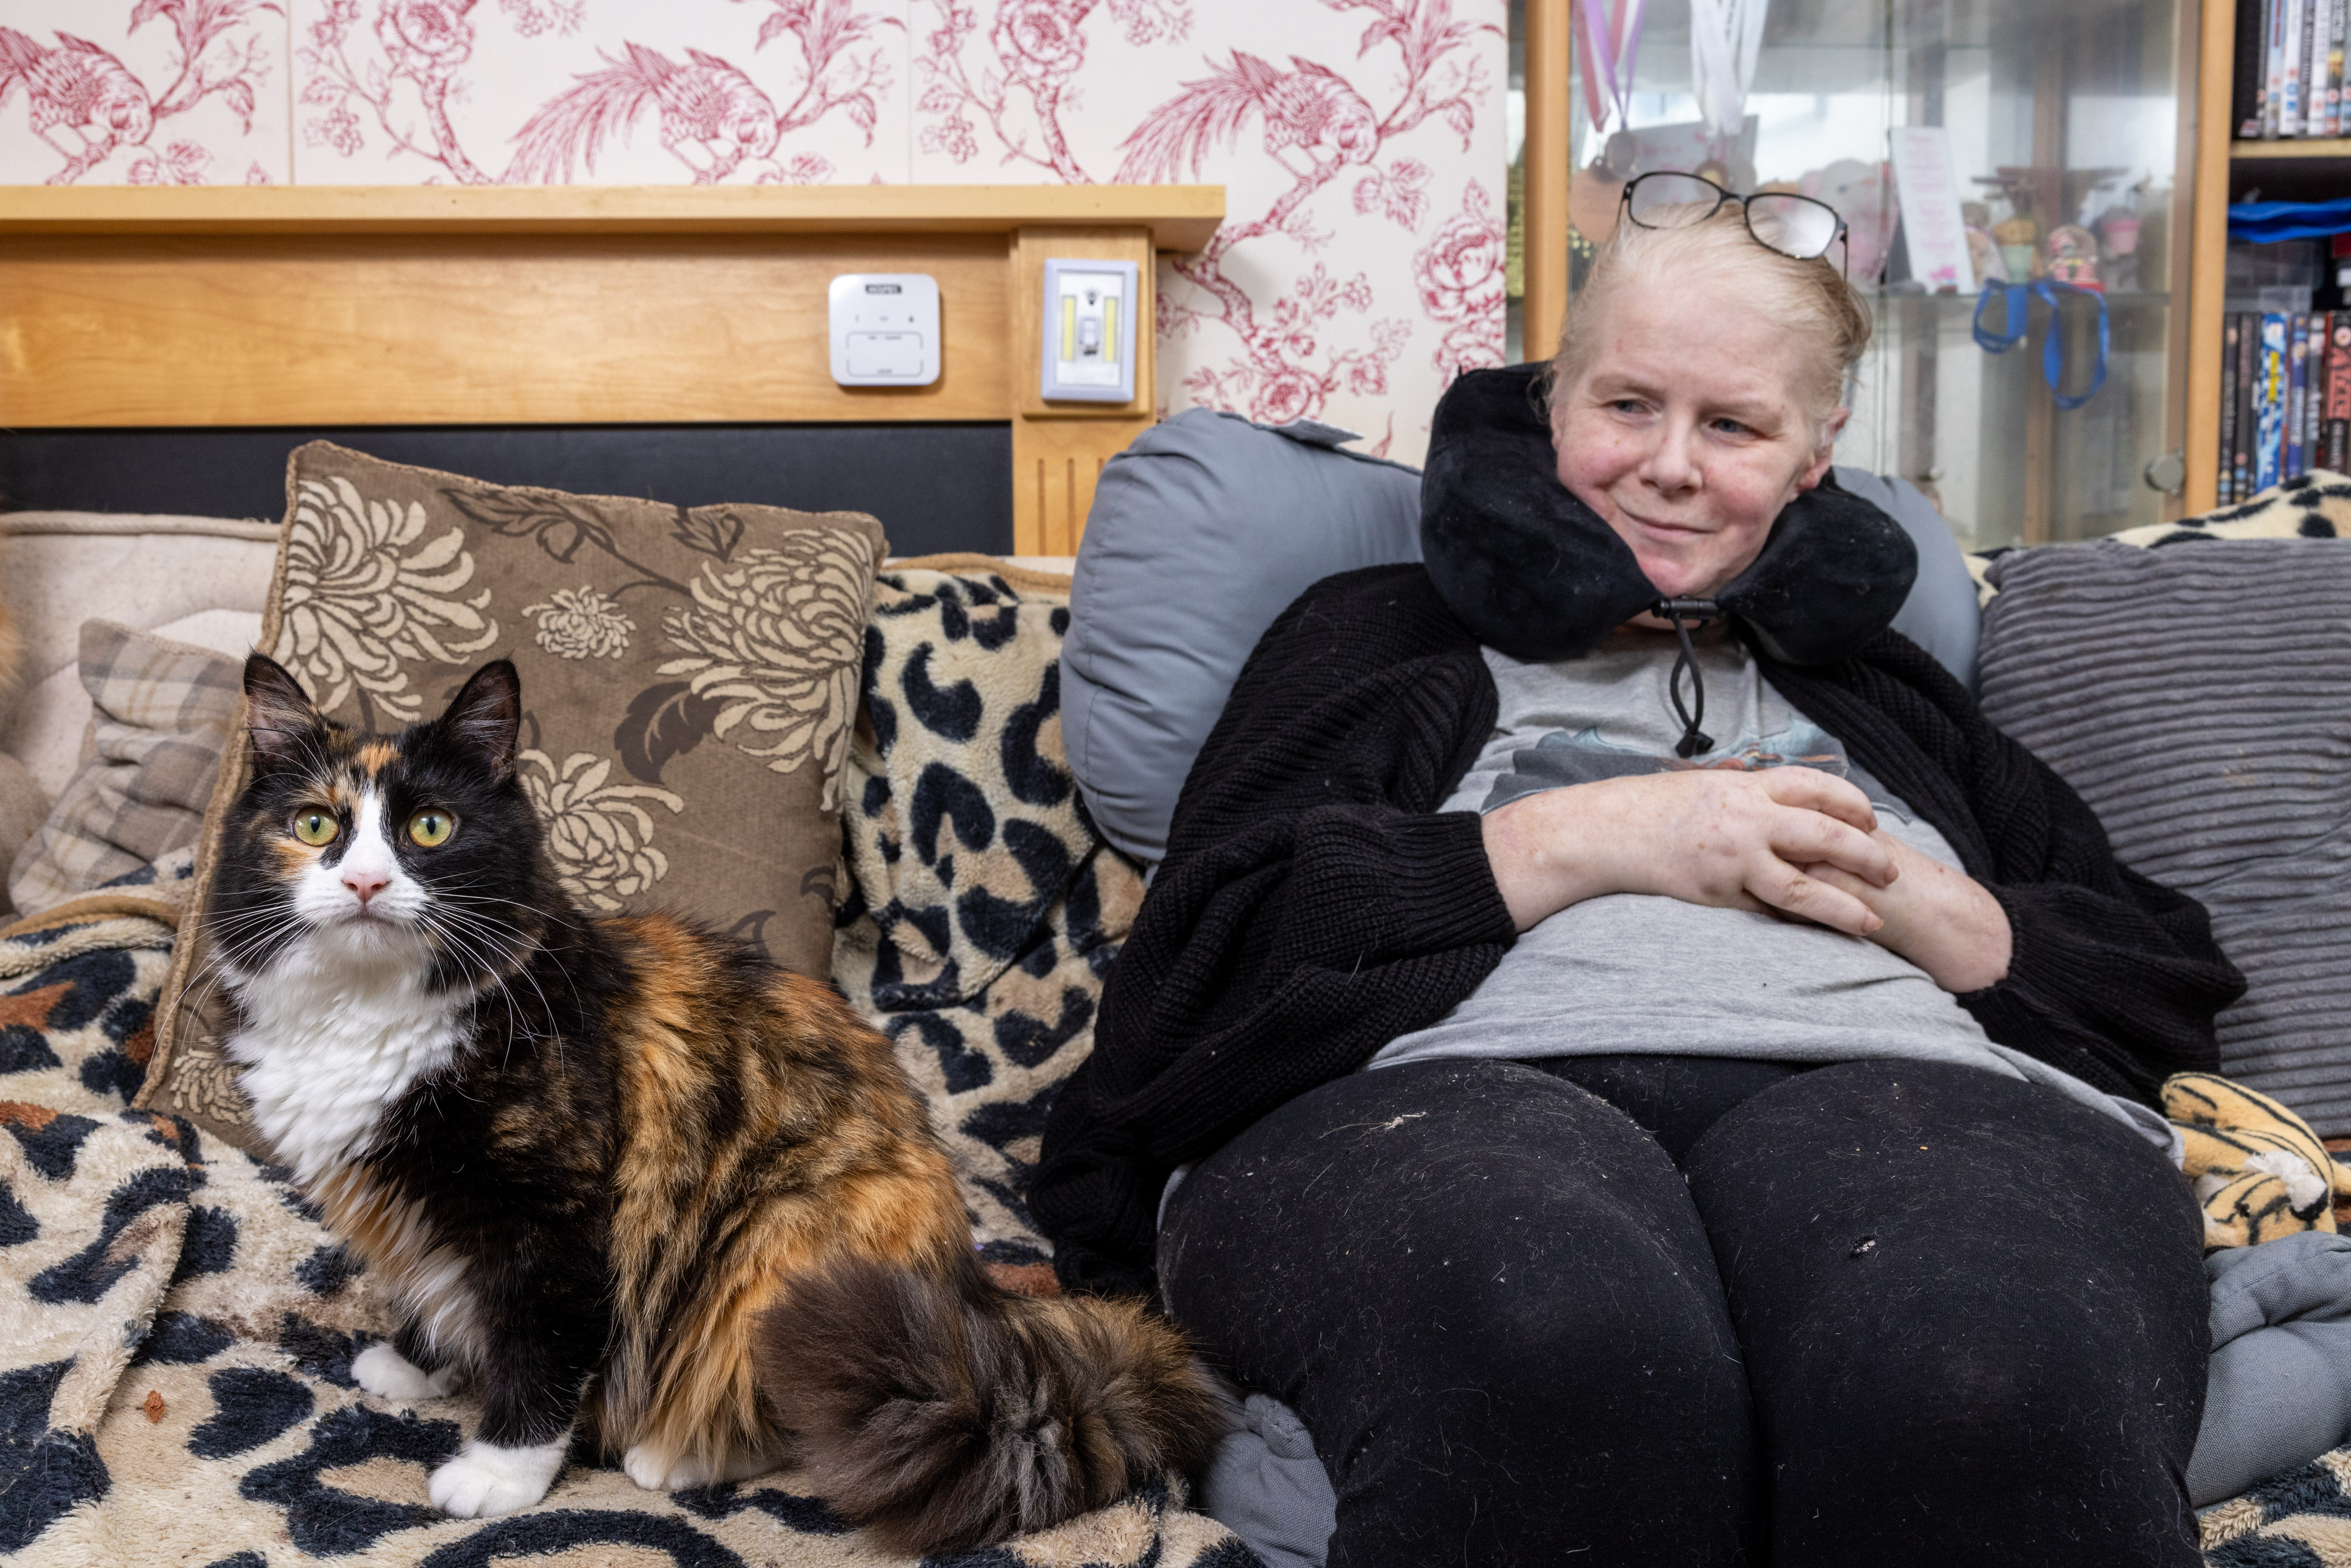 Amanda Jameson with her pet cat Willow, a finalist in the 'Moggy Marvels' category of this year's Cats Protection National Cat Awards